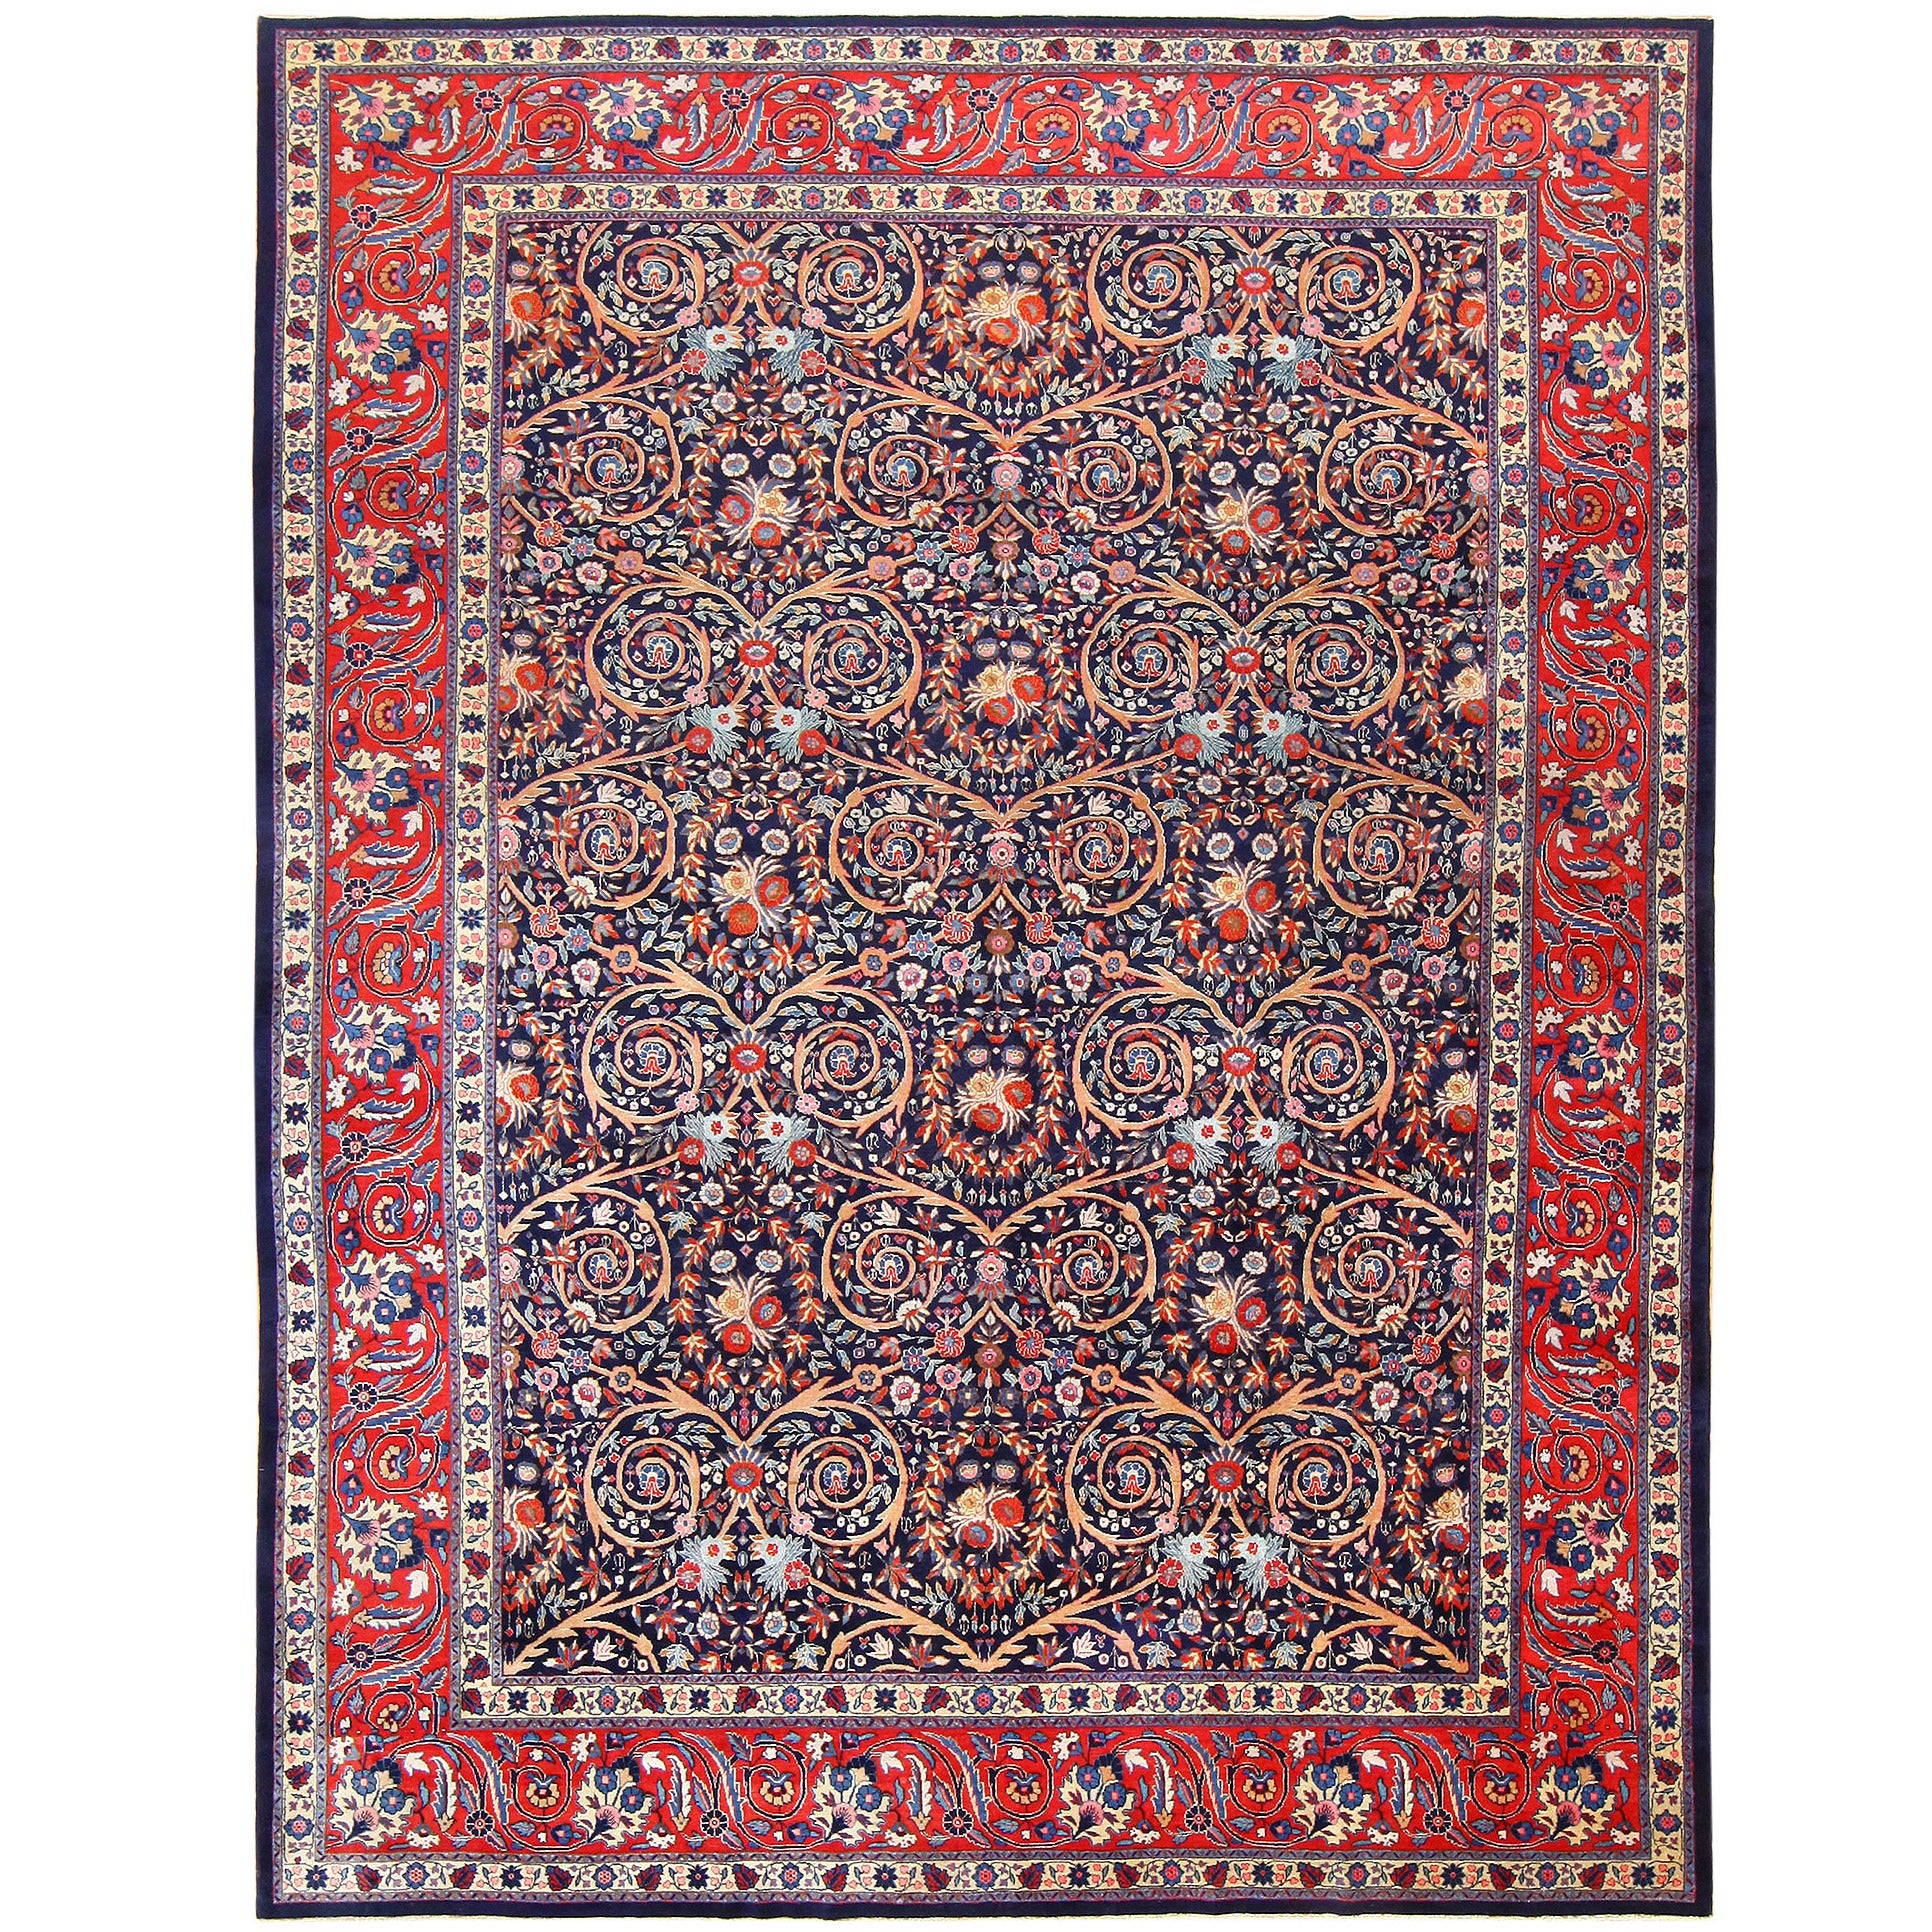 Beautiful Antique Persian Tabriz Carpet. Size: 11 ft x 14 ft 3 in